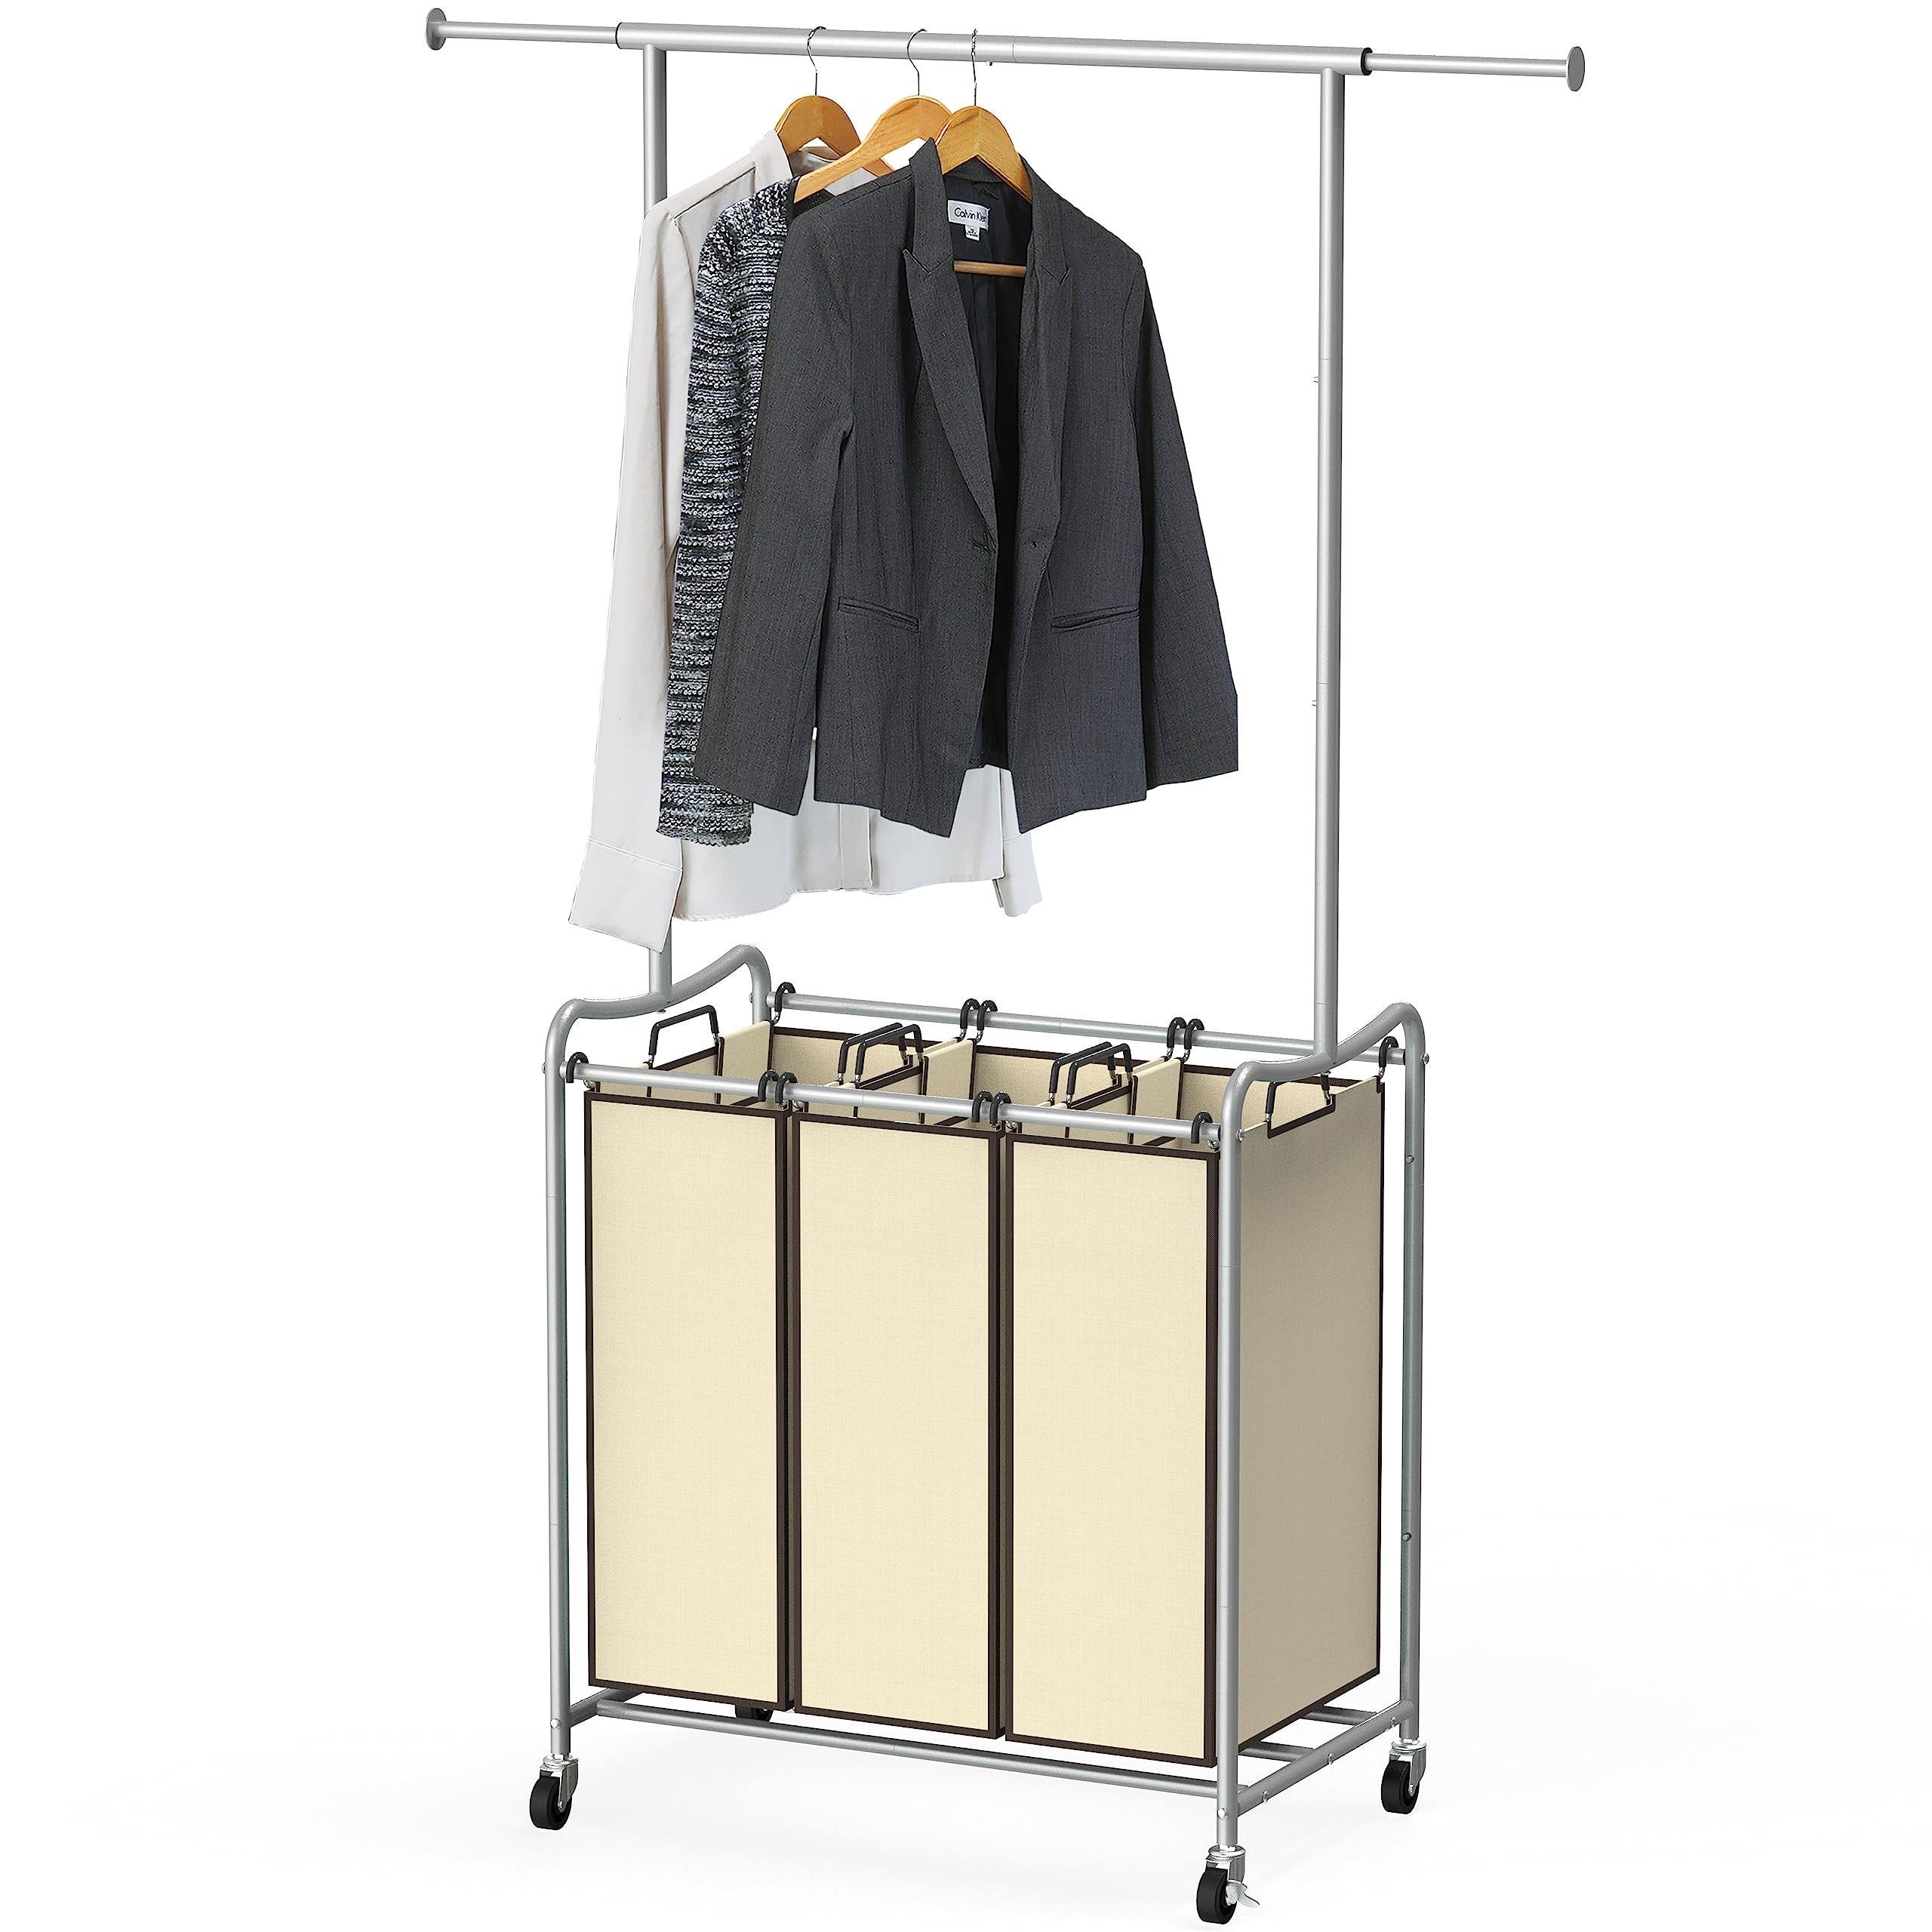 Sturdy 3-Bag Laundry Sorter Cart with Hanging Bar for Adults | Image